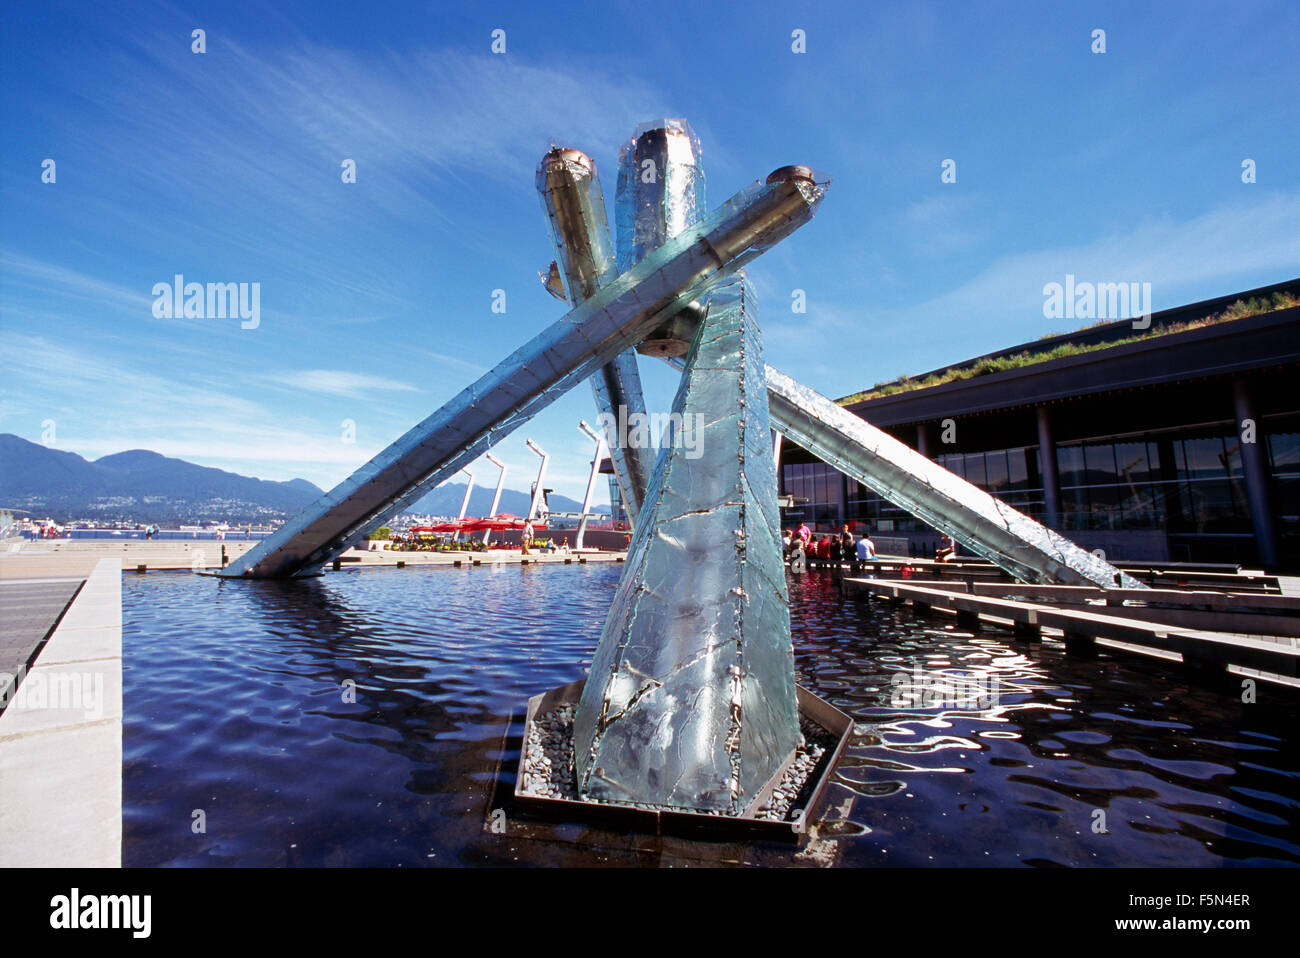 Olympic Cauldron at Jack Poole Plaza, Vancouver, BC, British Columbia, Canada - Legacy from 2010 Winter Olympics Stock Photo